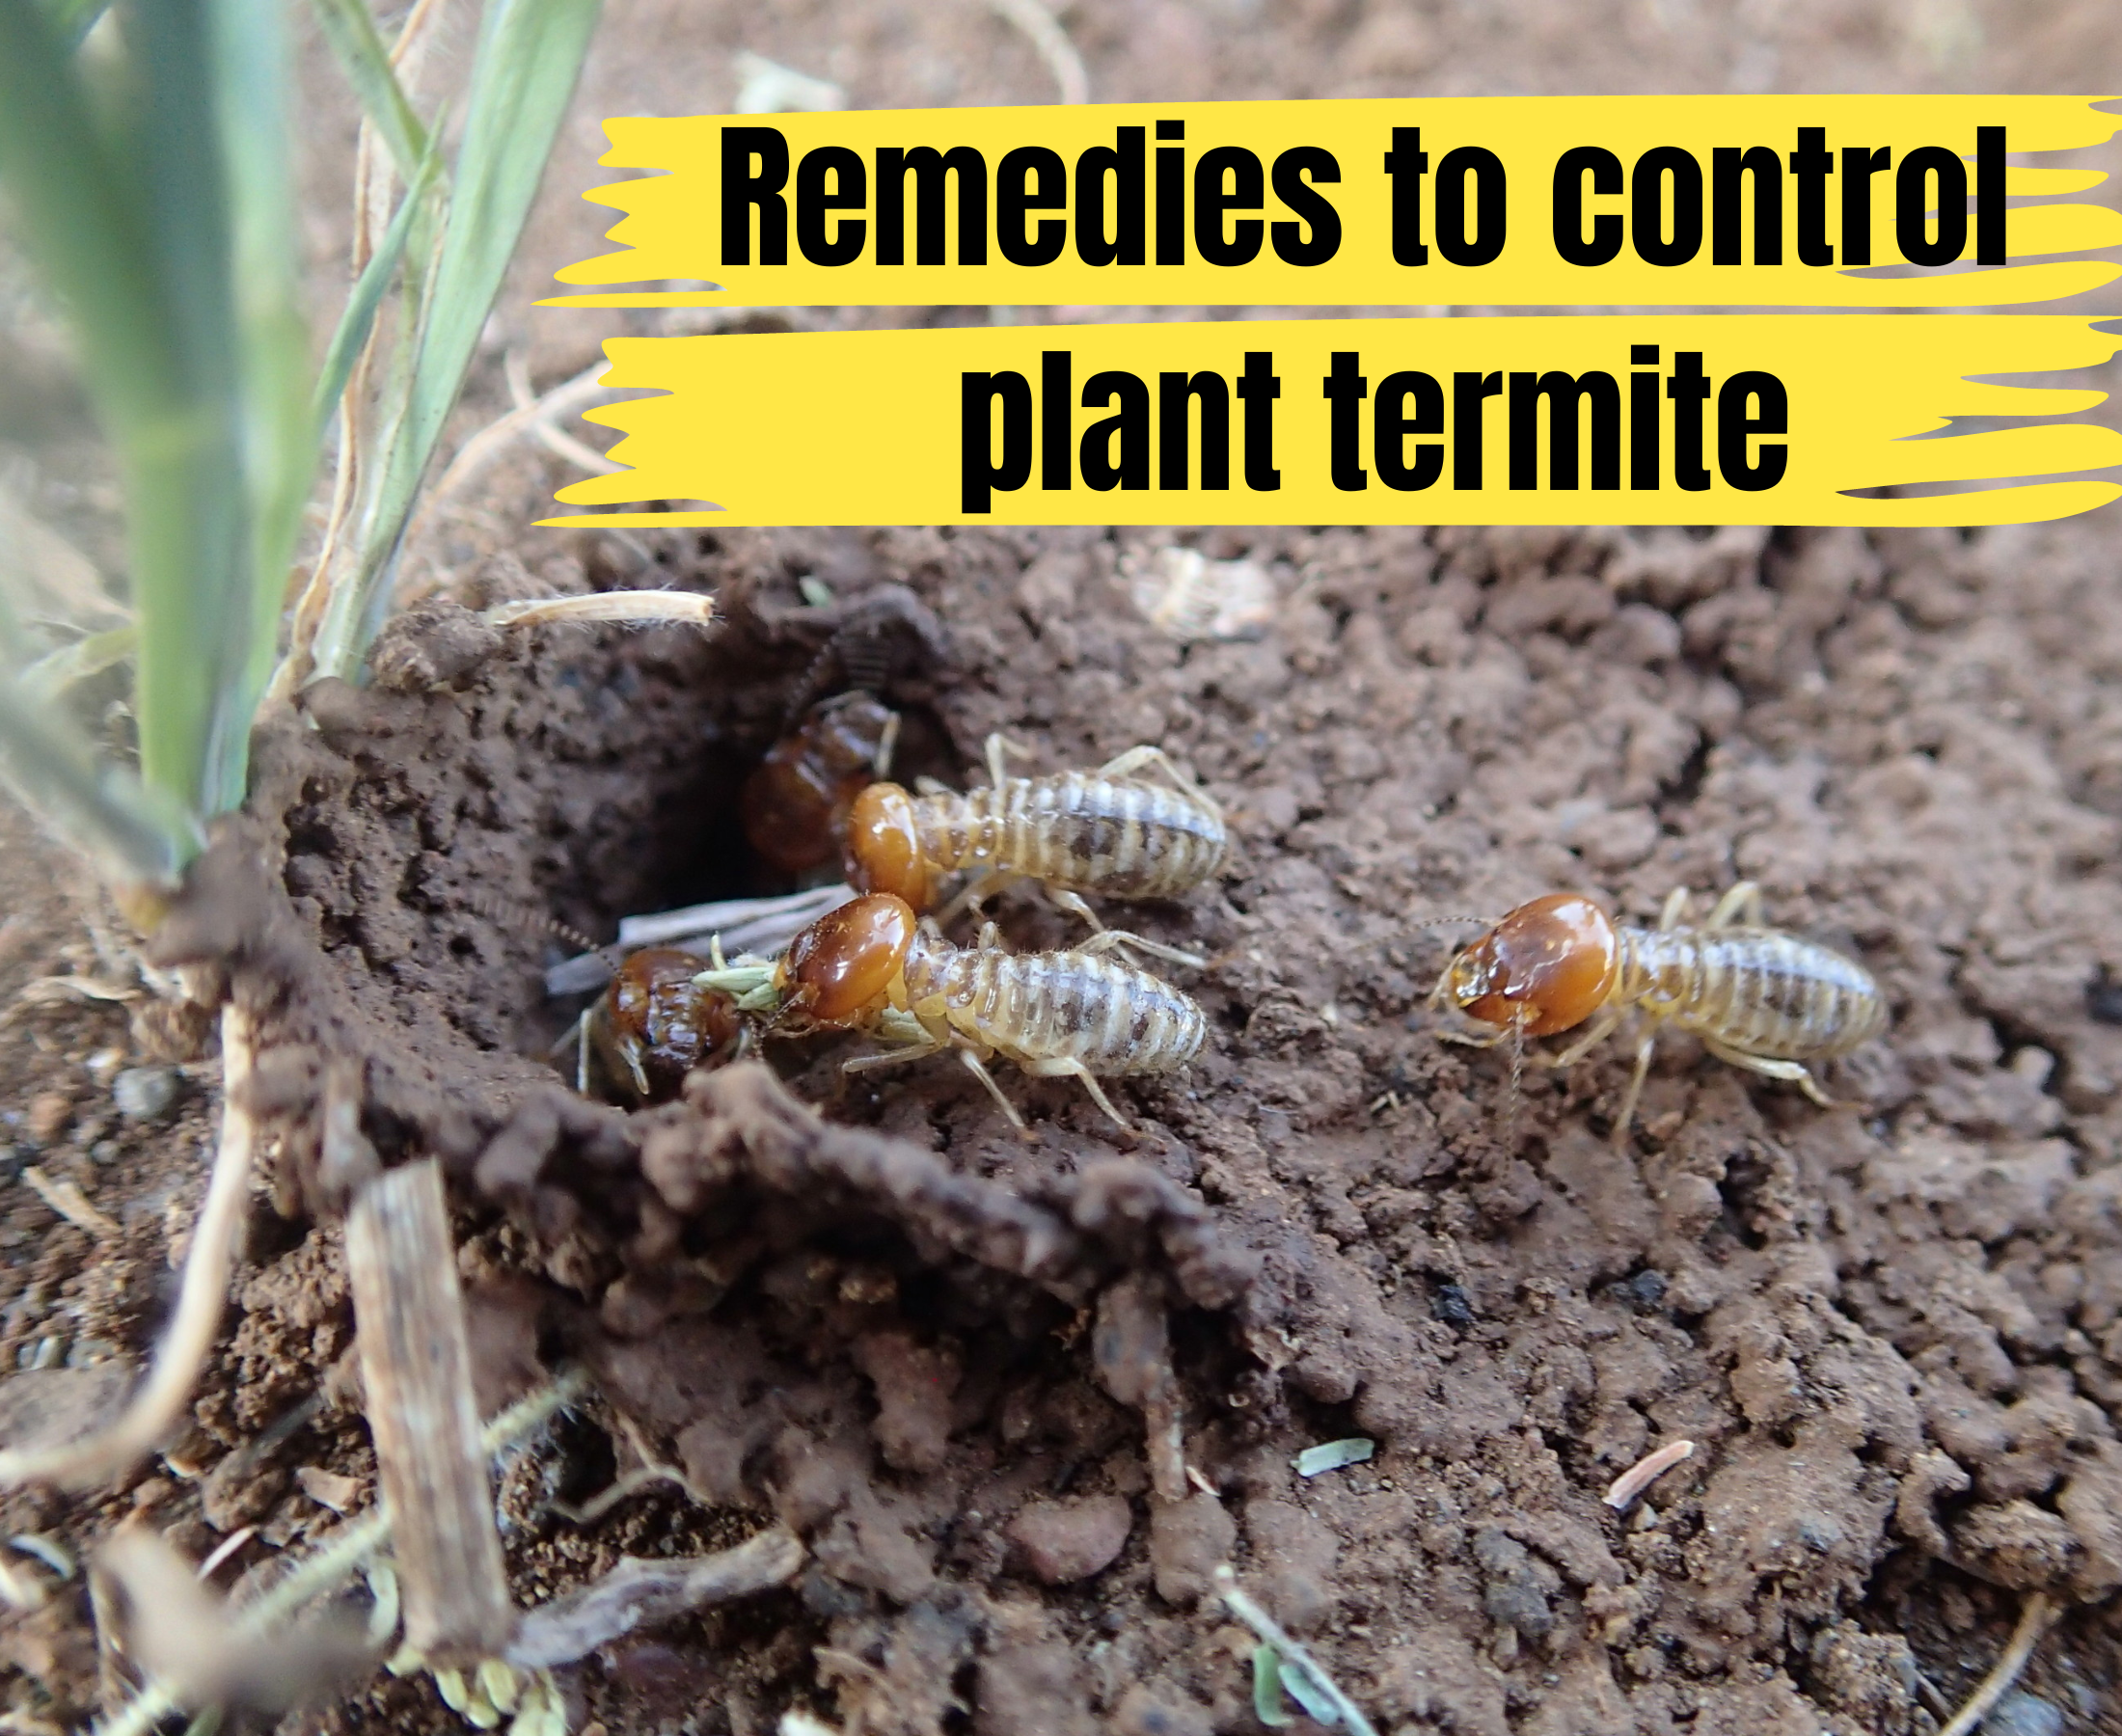 How do get rid of termites in plants?